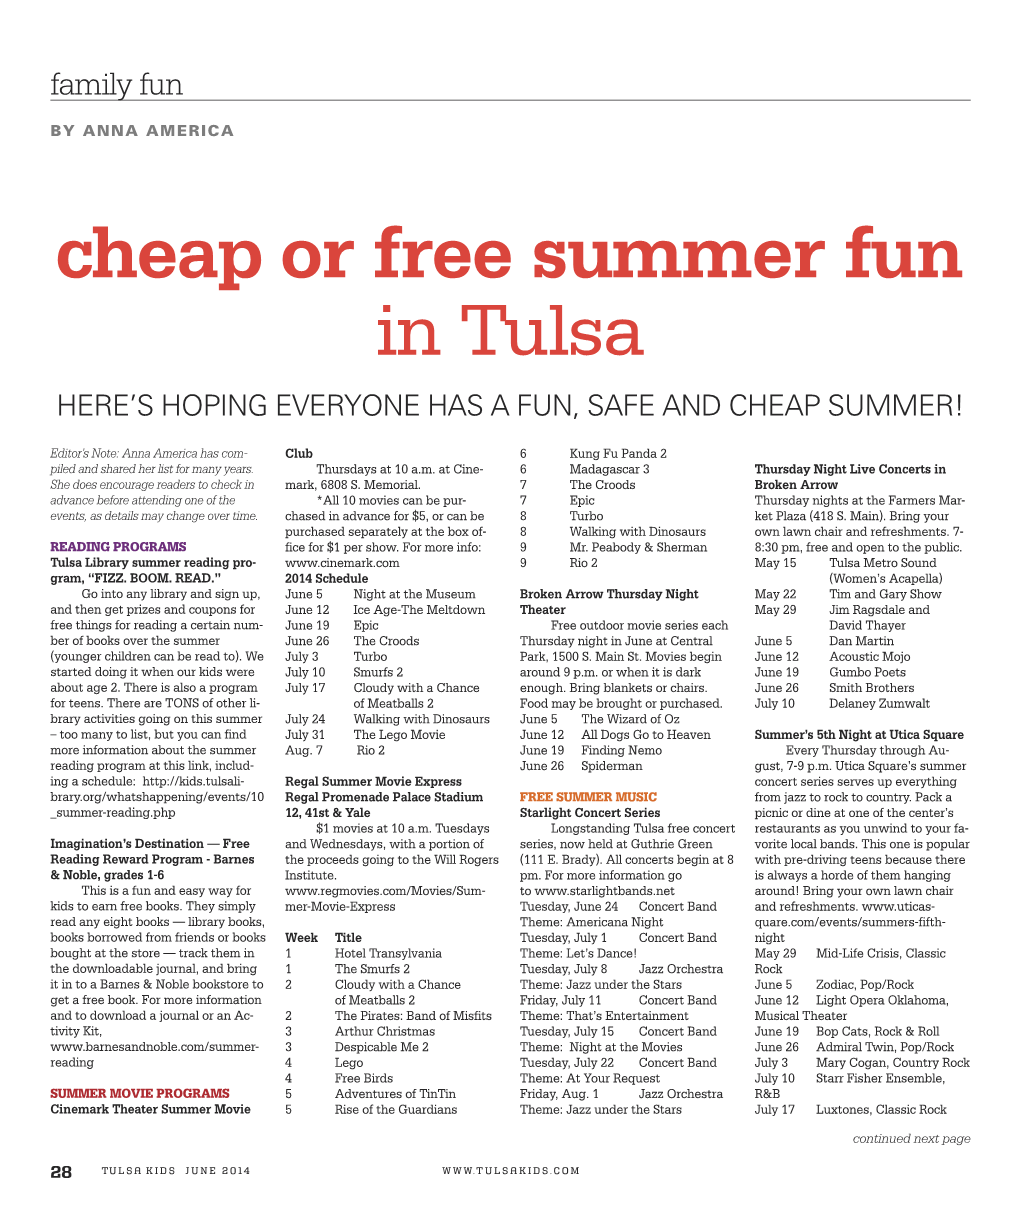 Cheap Or Free Summer Fun in Tulsa HERE’S HOPING EVERYONE HAS a FUN, SAFE and CHEAP SUMMER!